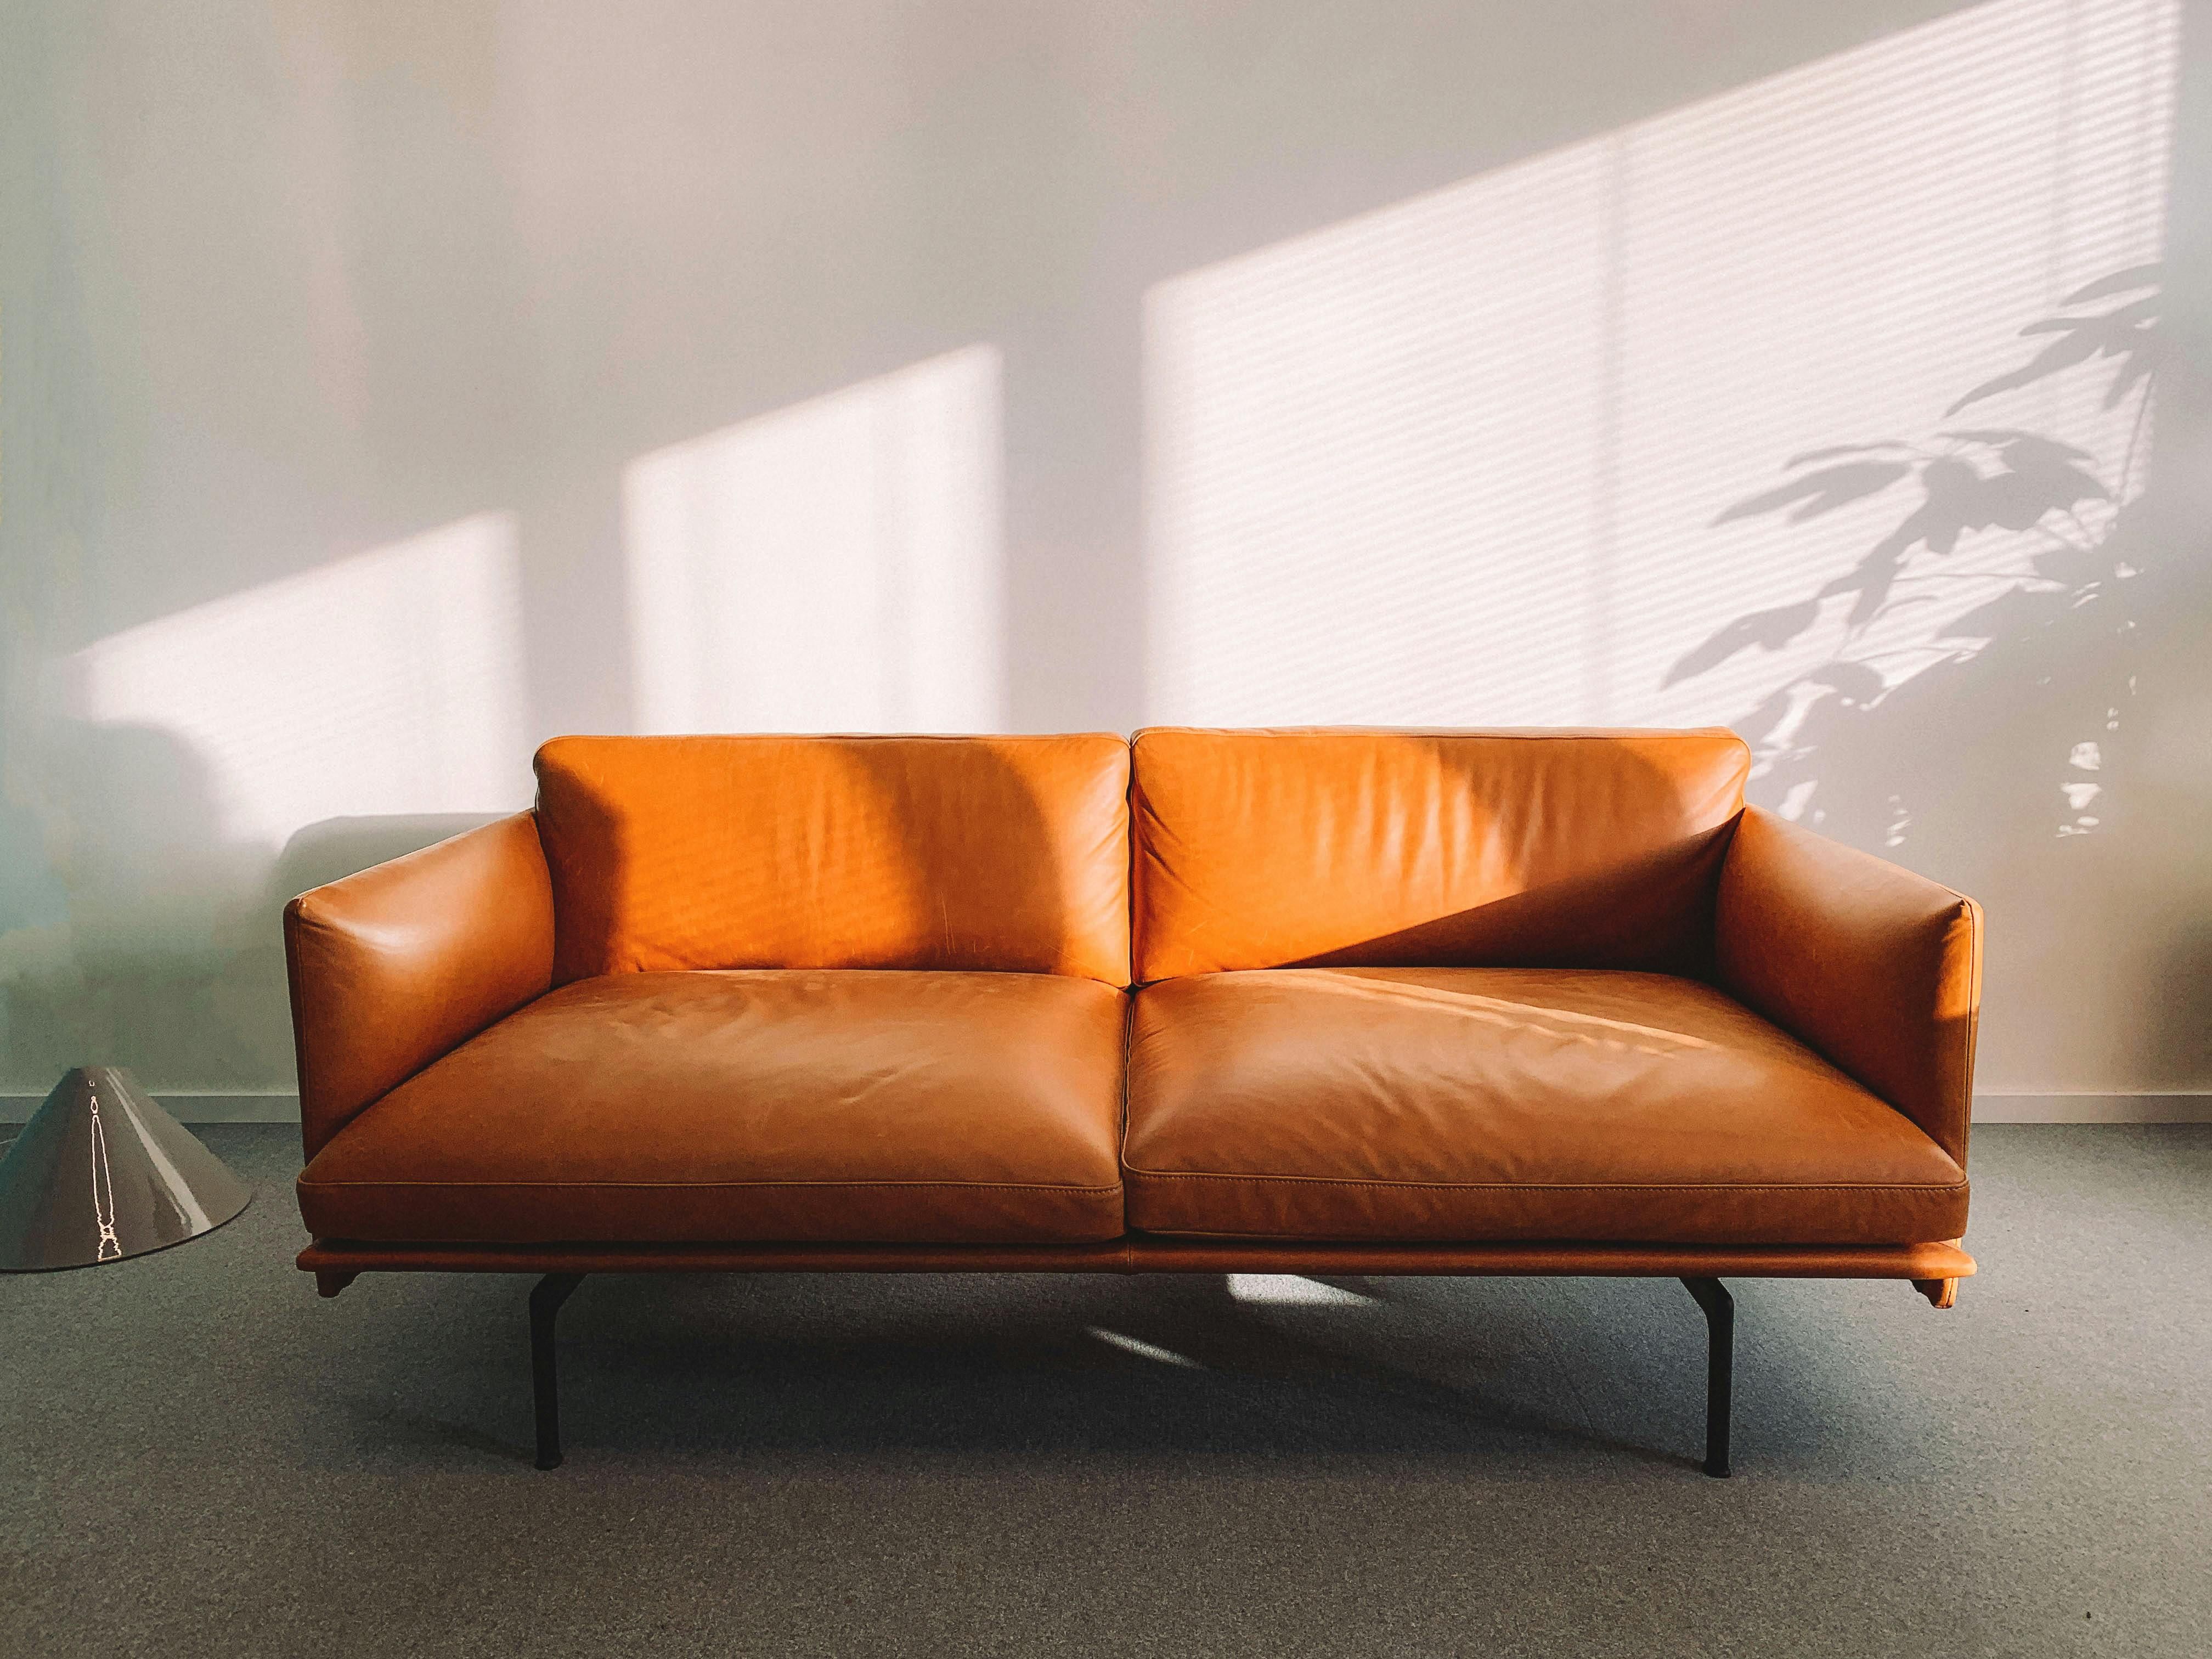 A cognac-colored leather couch, bathed in sunlight shining through the window of a trauma therapist's office.